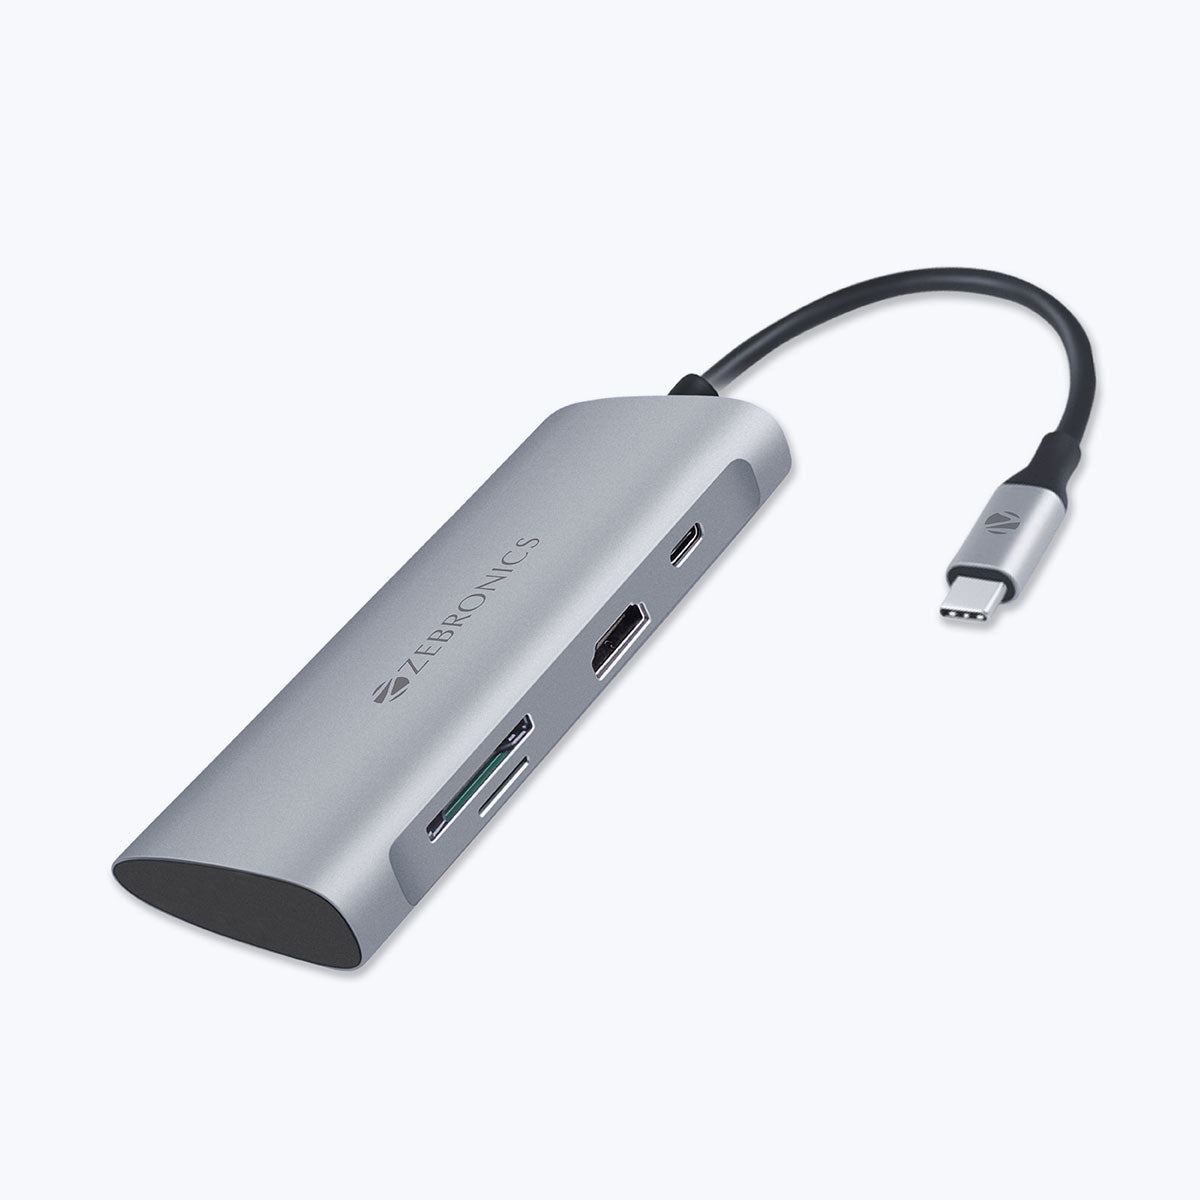 Zeb-TA1500UCVP – 7 in 1 USB Type C Multiport Adapter with USB, HDMI, SD, Micro SD, Type C PD - Zebronics